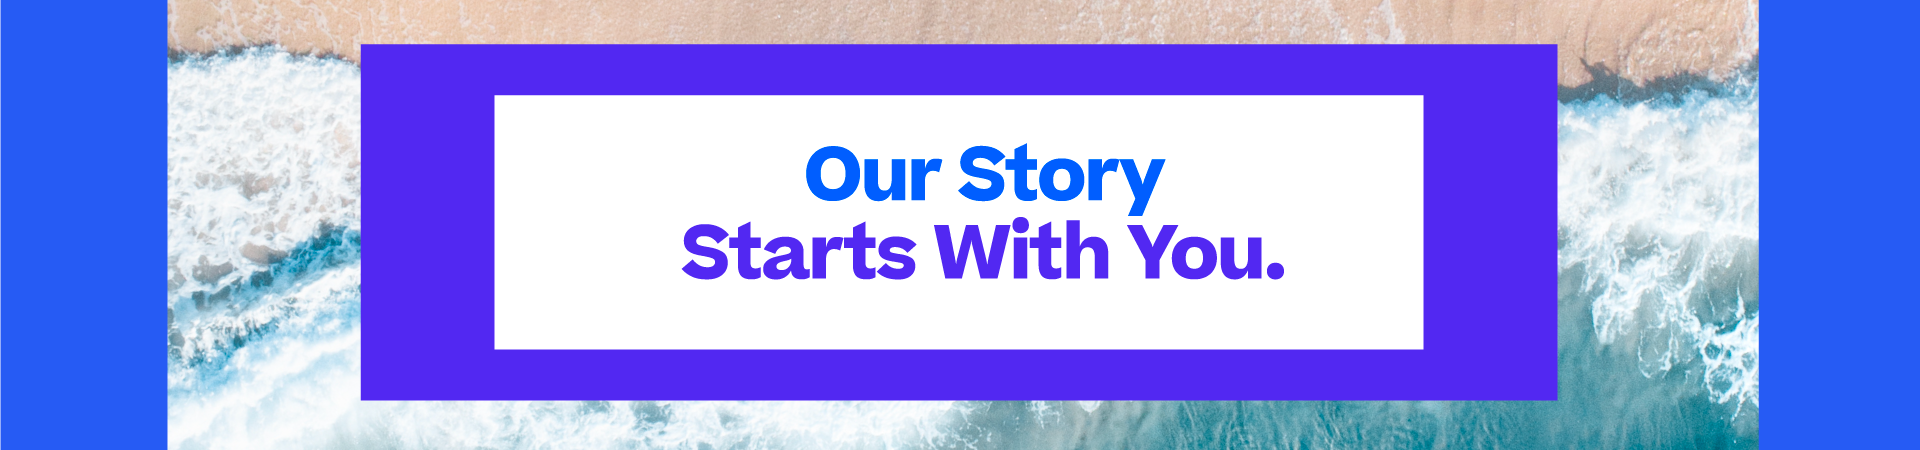 Our Story Starts With You